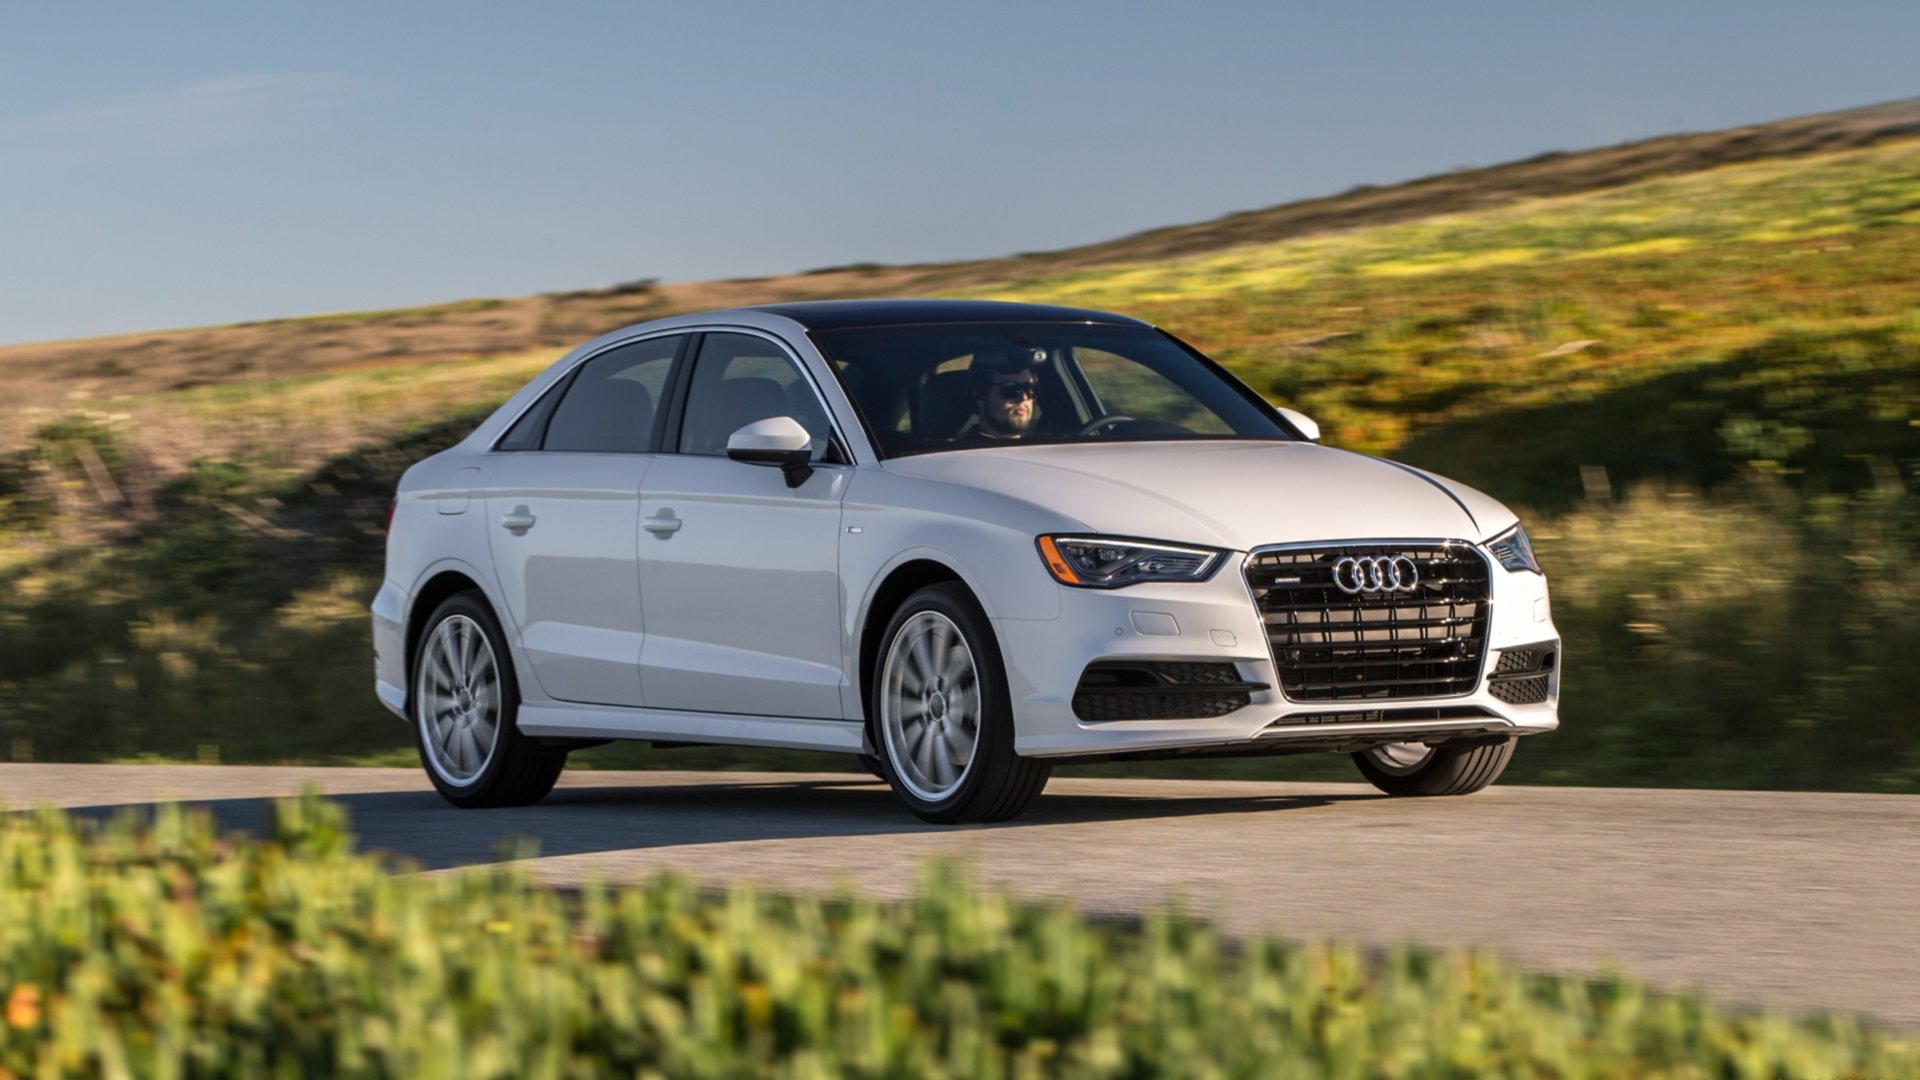 Best Audi A3 wallpaper ID:39858 for High Resolution full hd 1080p computer